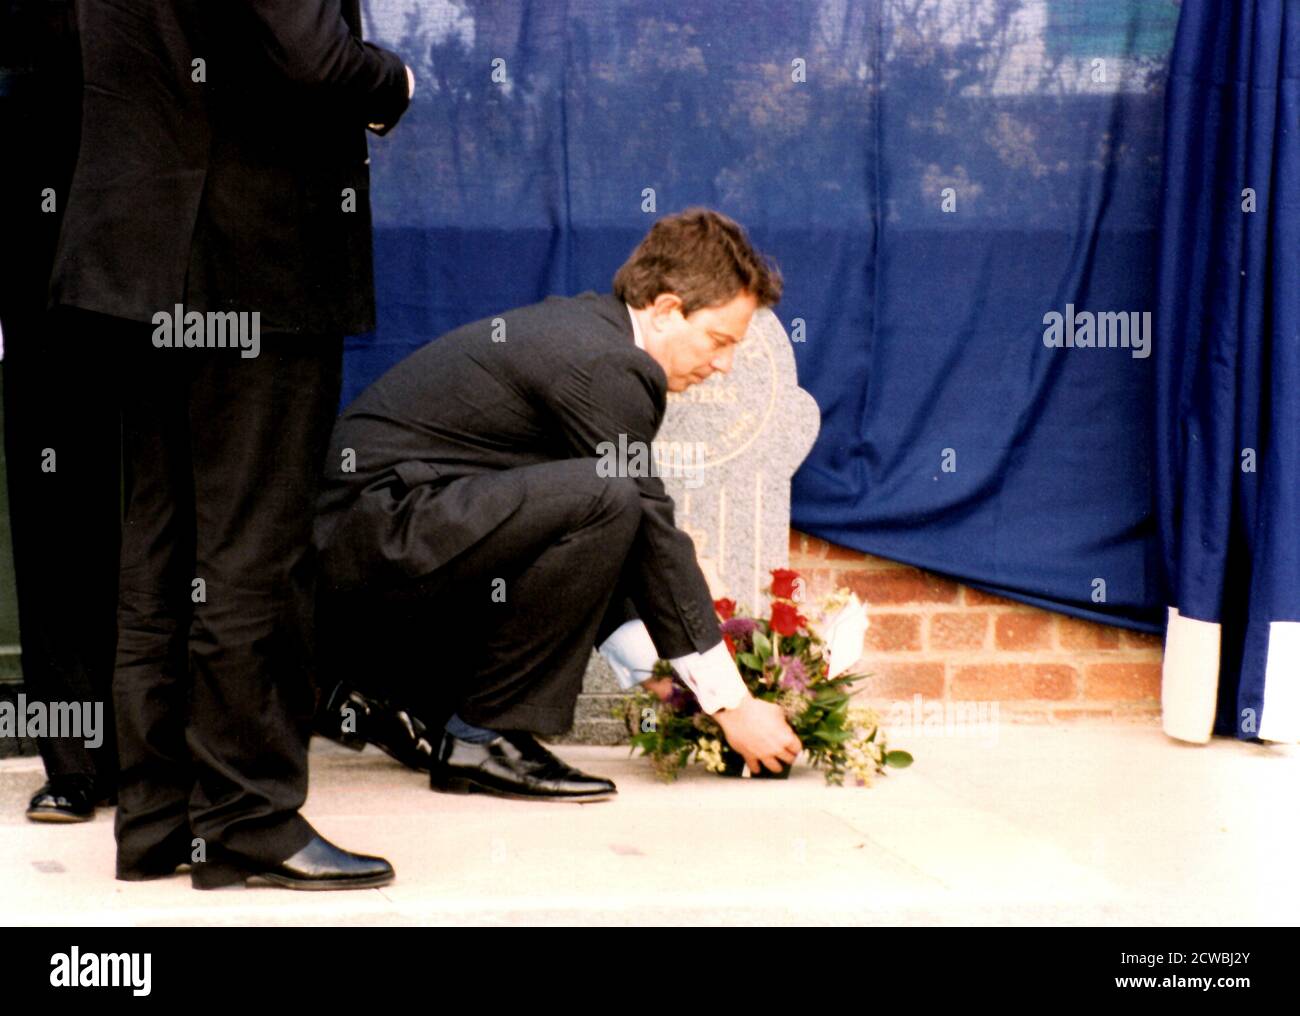 British Prime Minister Tony Blair lays a wreath at a memorial for PC Phillip John Walters was a police officer in London's Metropolitan Police Service who was shot dead while investigating a domestic disturbance in Ilford, Essex, on 18 April 1995 Stock Photo